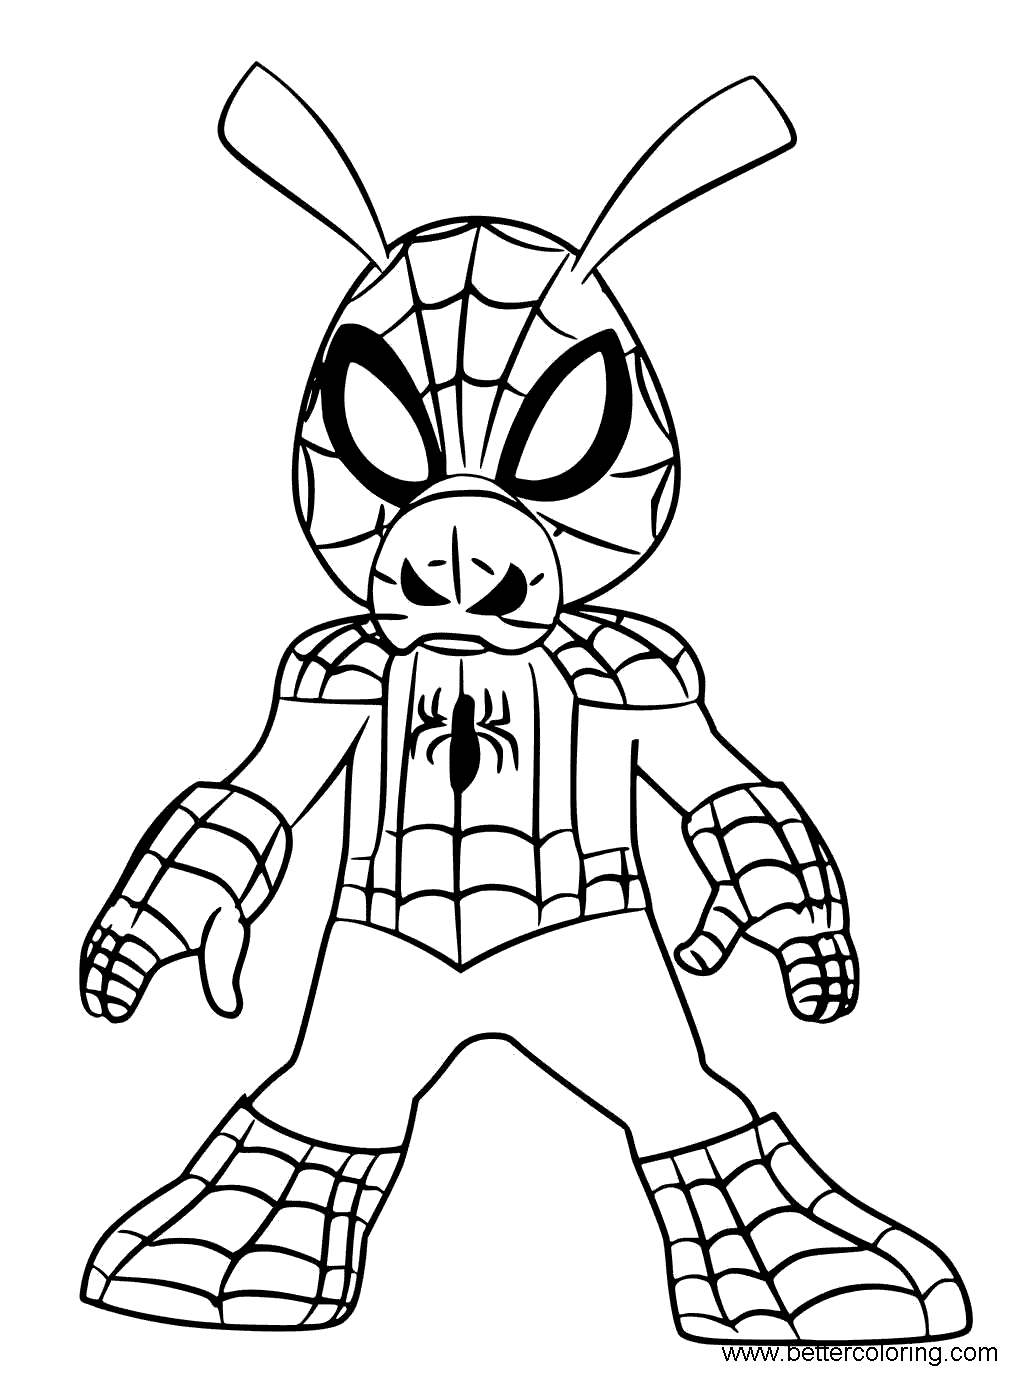 Miles Morales Coloring Pages Spider Ham - Free Printable Coloring Pages